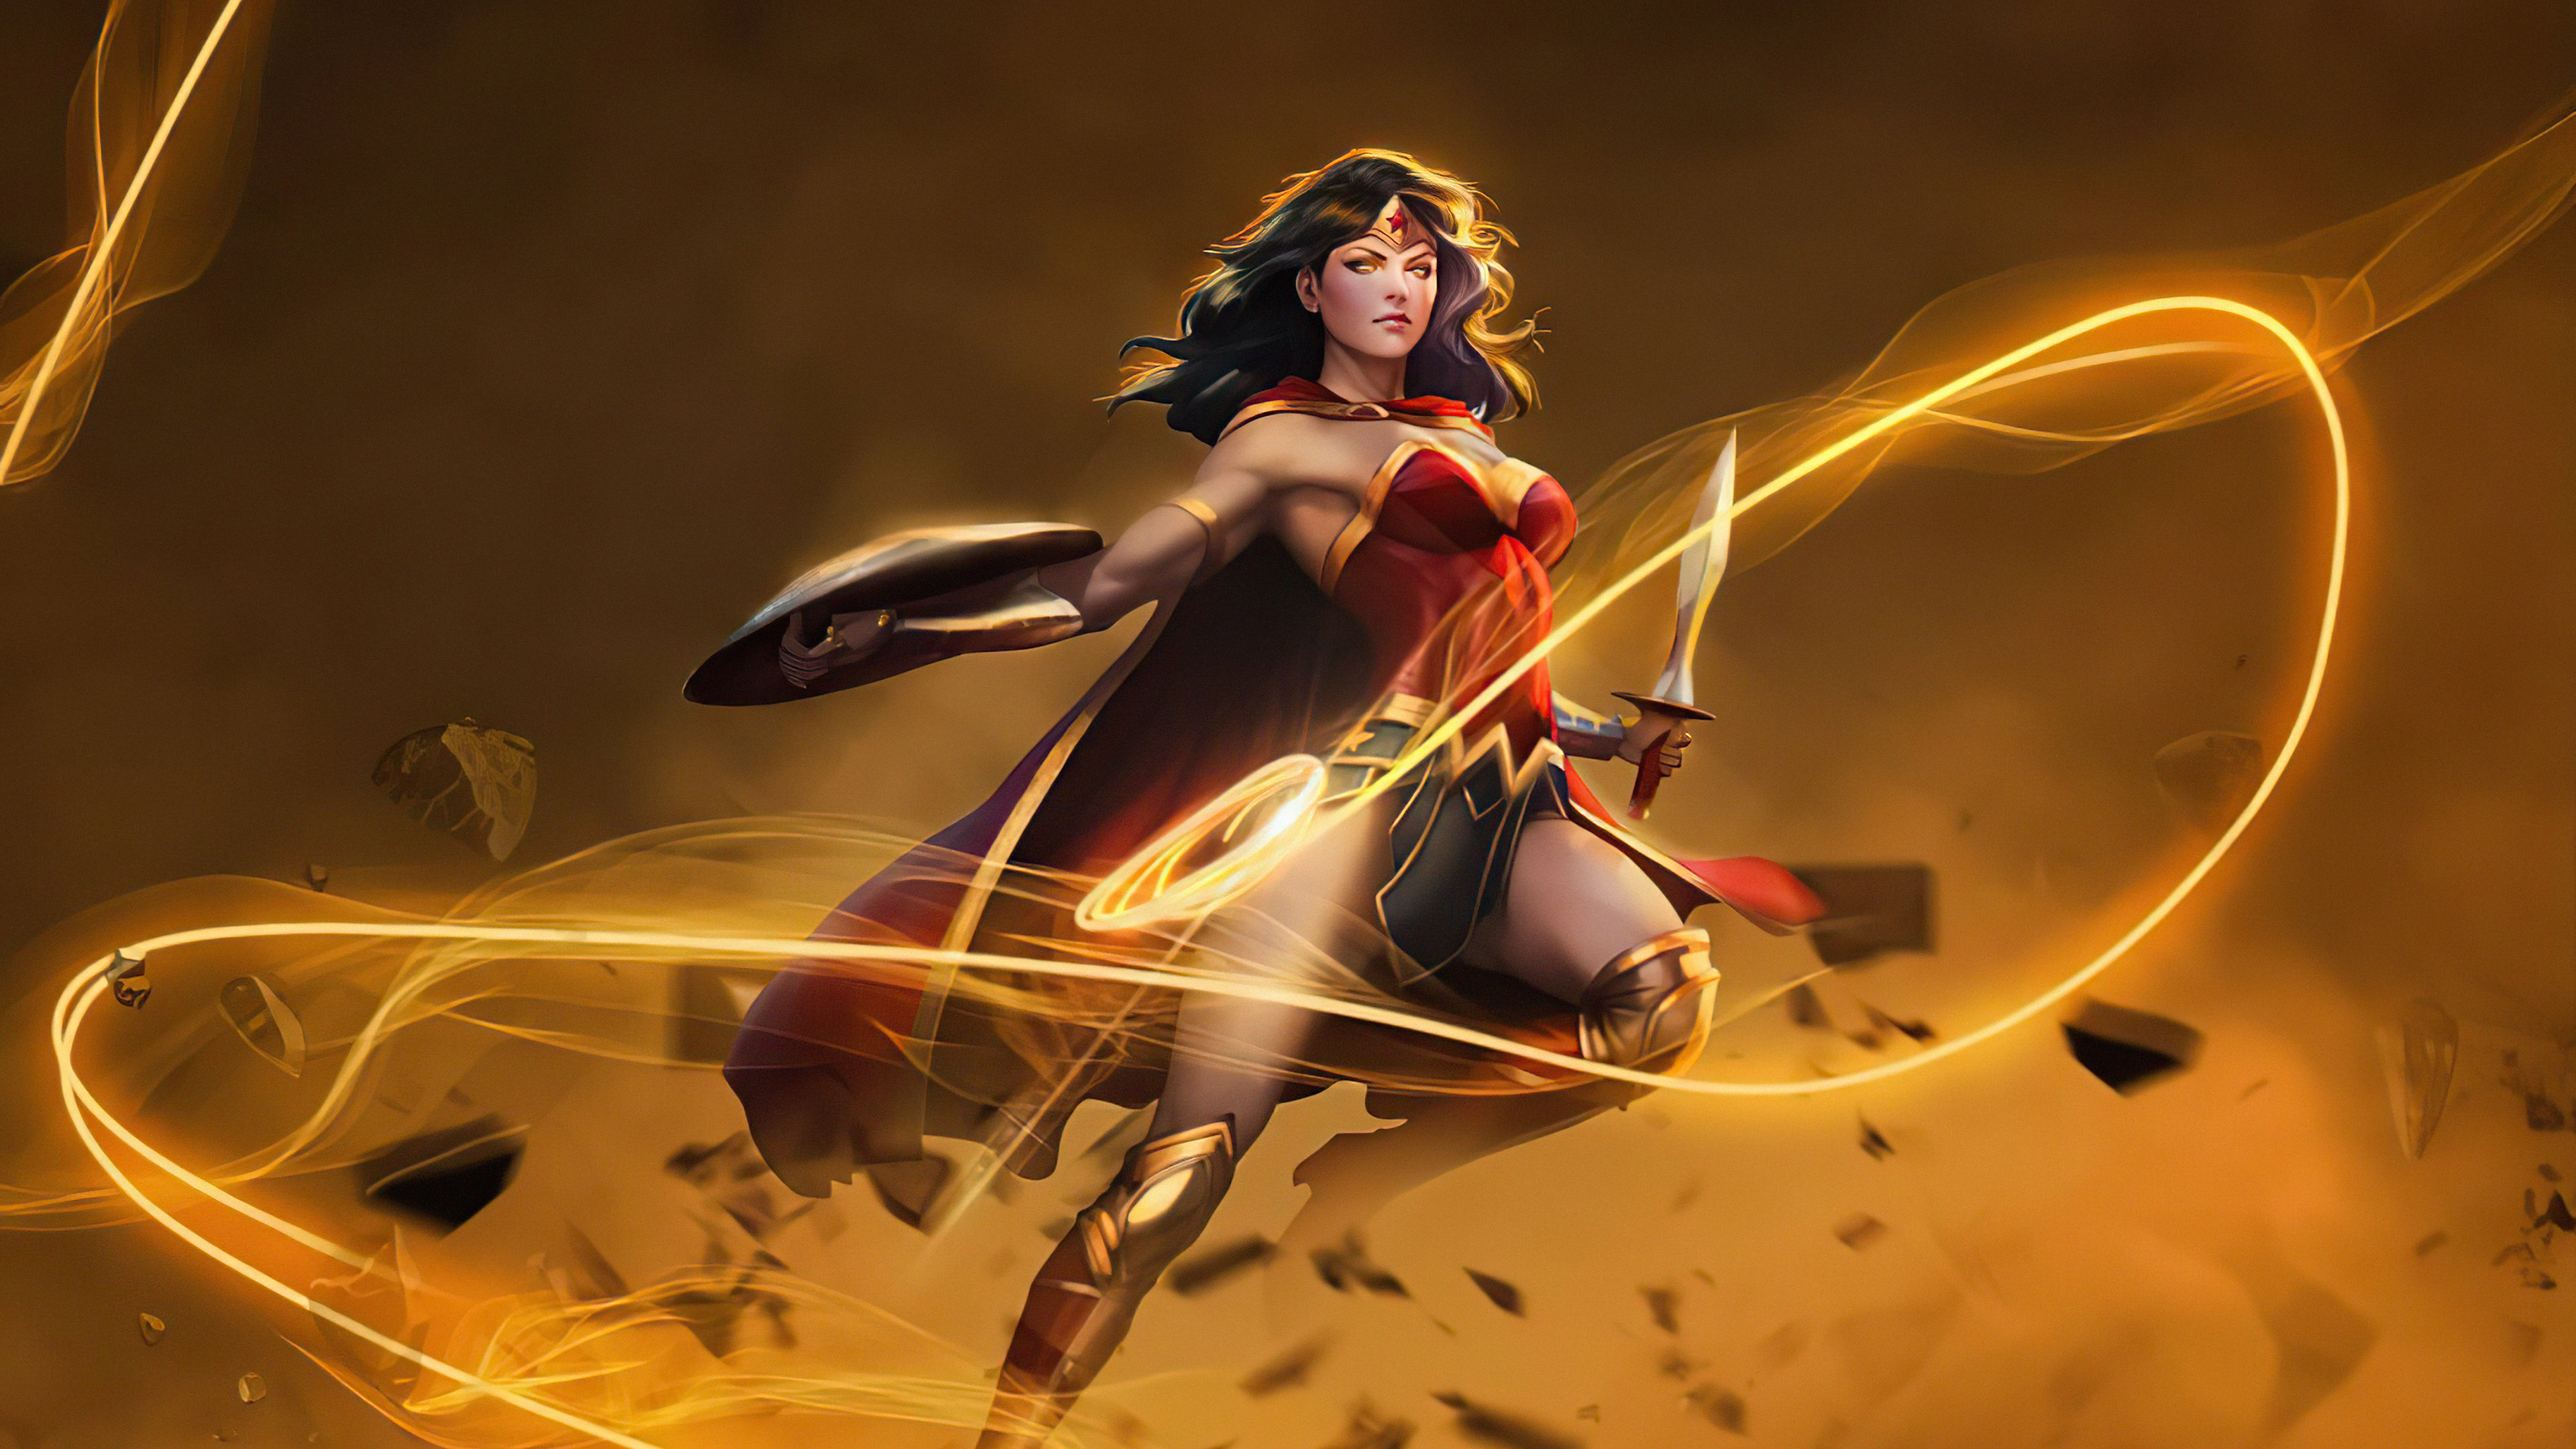 3840x2160 Wonder Woman Ability 4k, HD Superheroes, 4k Wallpapers, Images, Backgrounds, Photos and Pictures